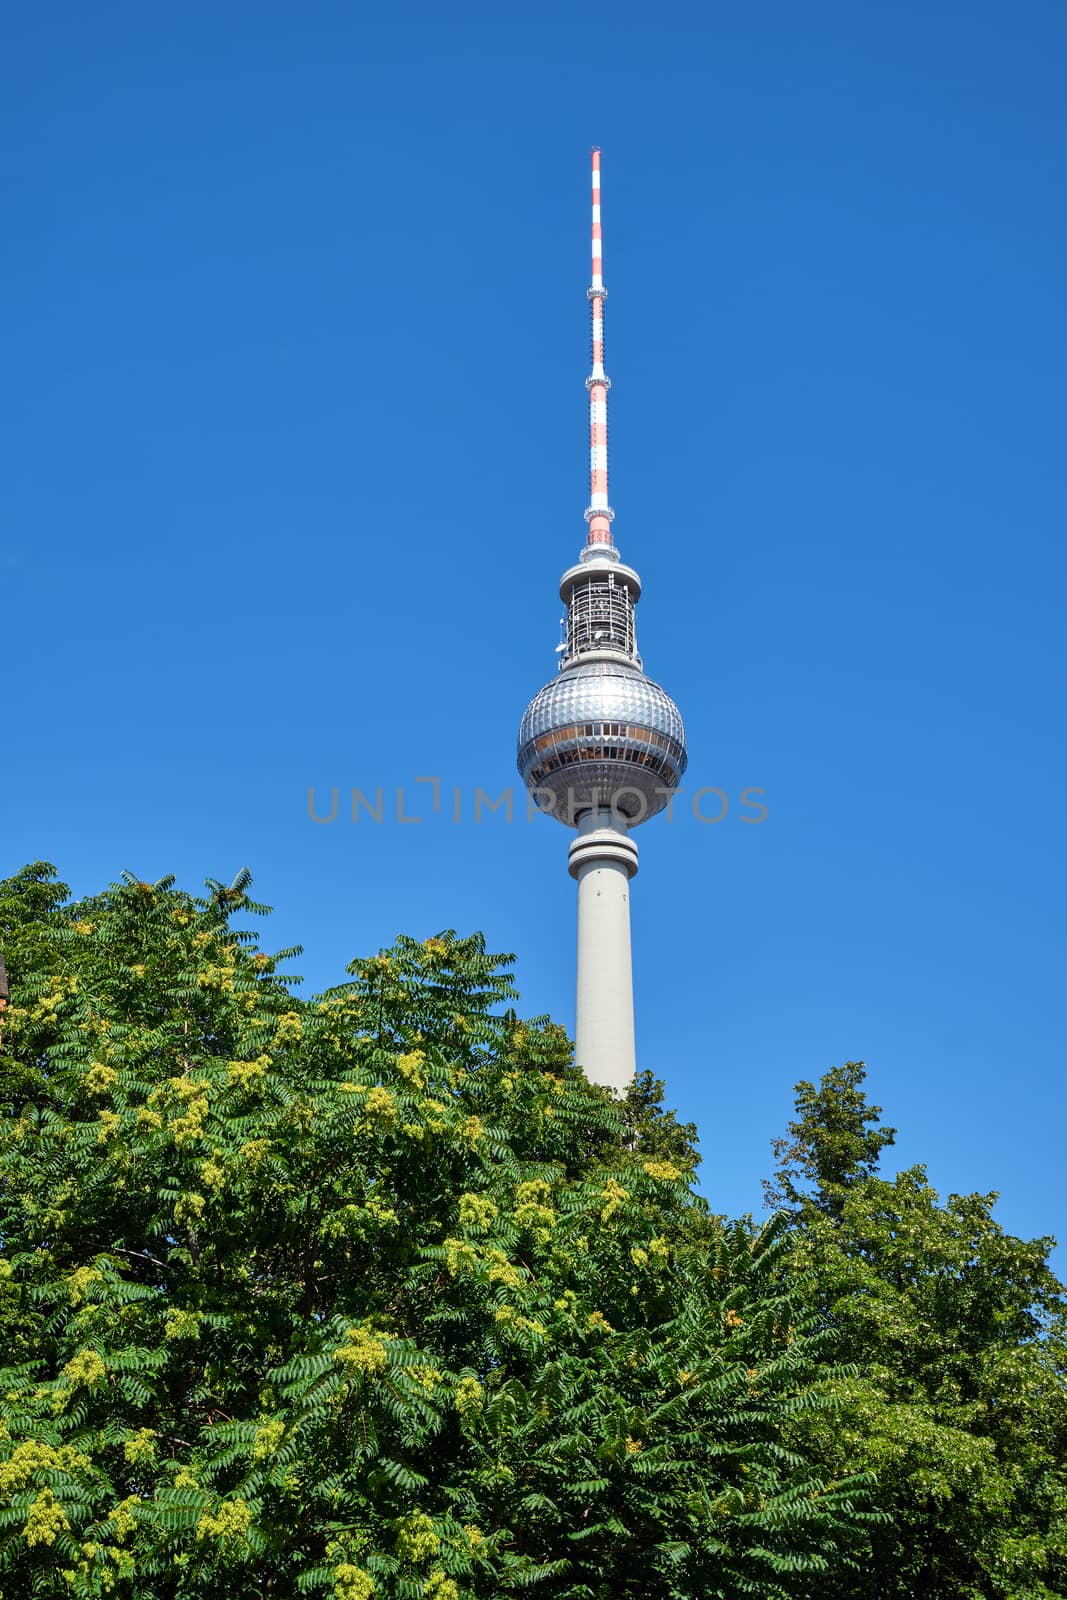 The famous Television Tower in Berlin behind some green trees